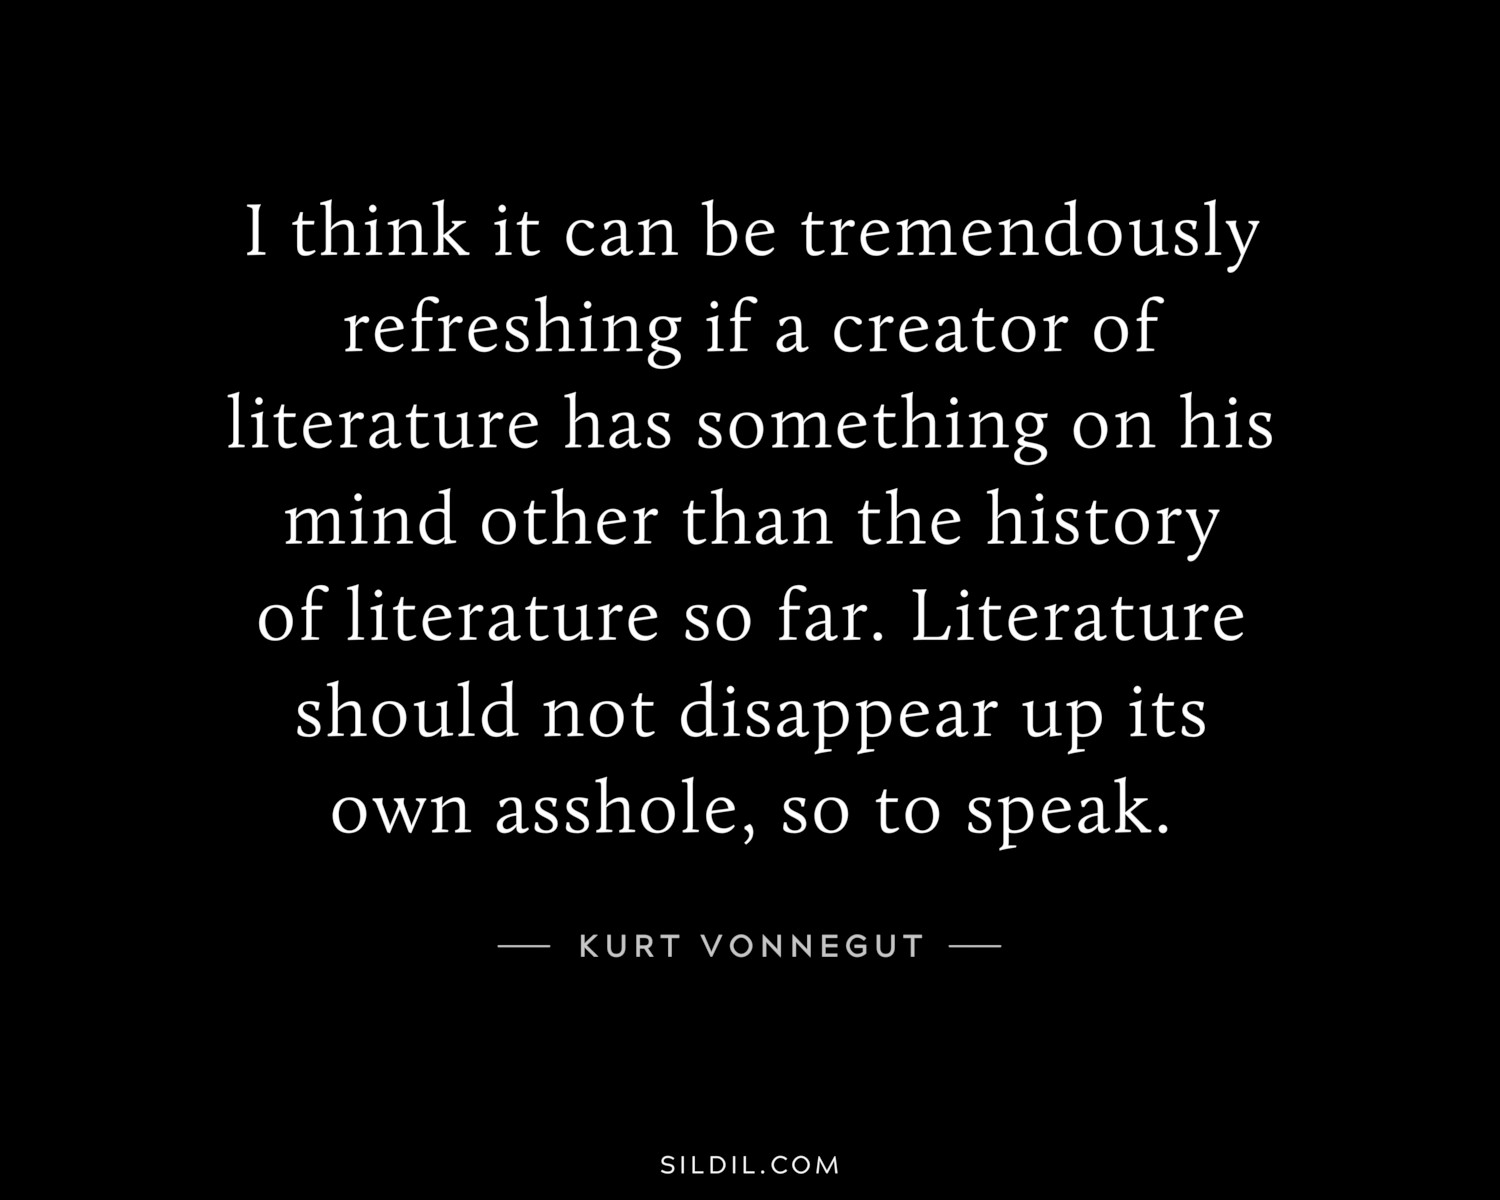 I think it can be tremendously refreshing if a creator of literature has something on his mind other than the history of literature so far. Literature should not disappear up its own asshole, so to speak.